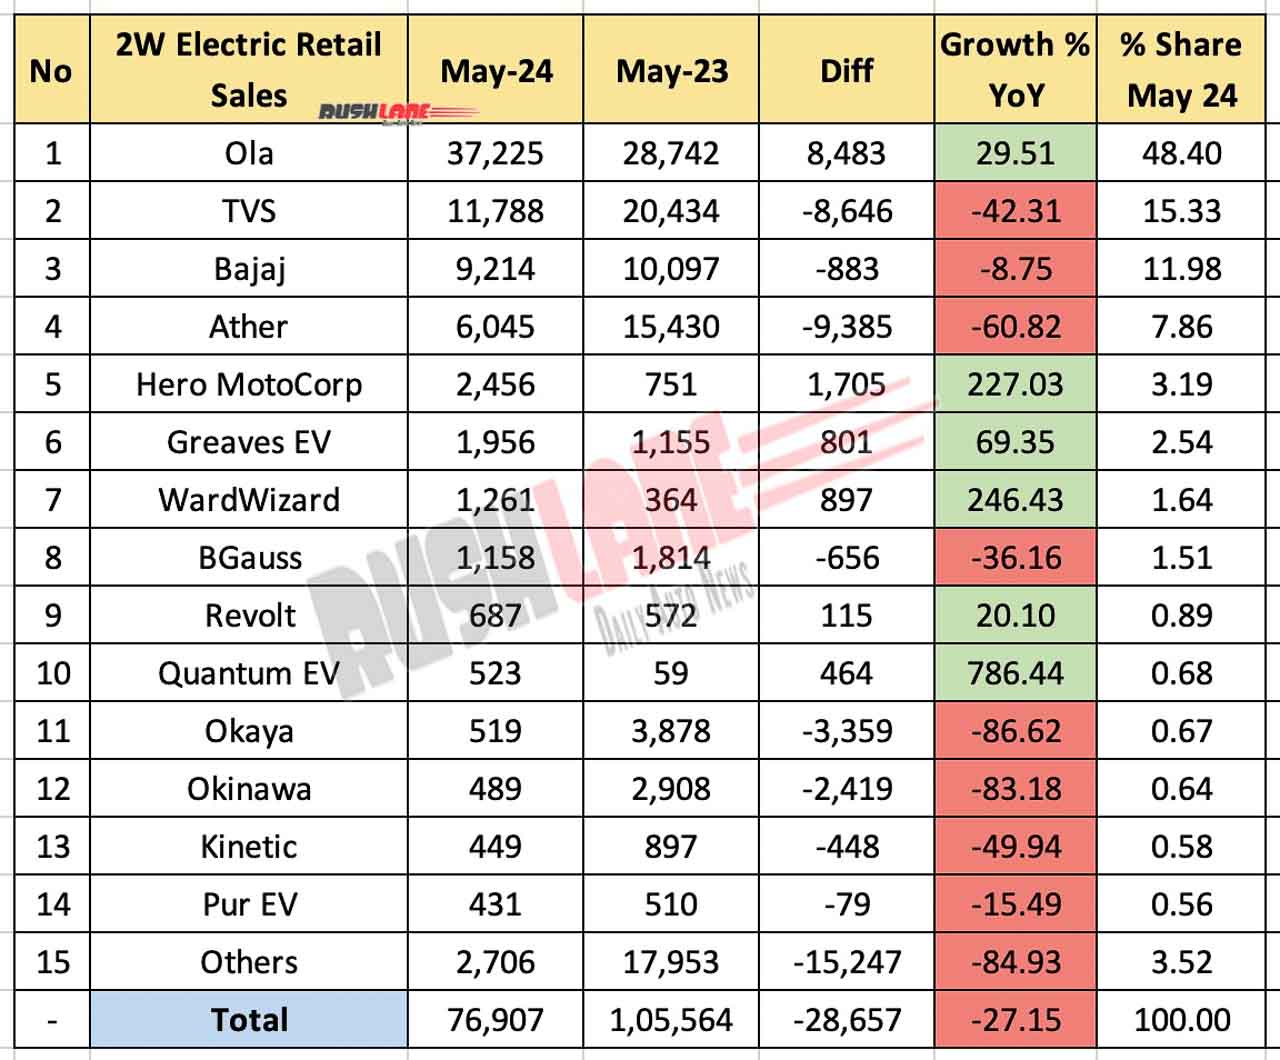 Electric 2W Sales May 2024 - YoY Comparison